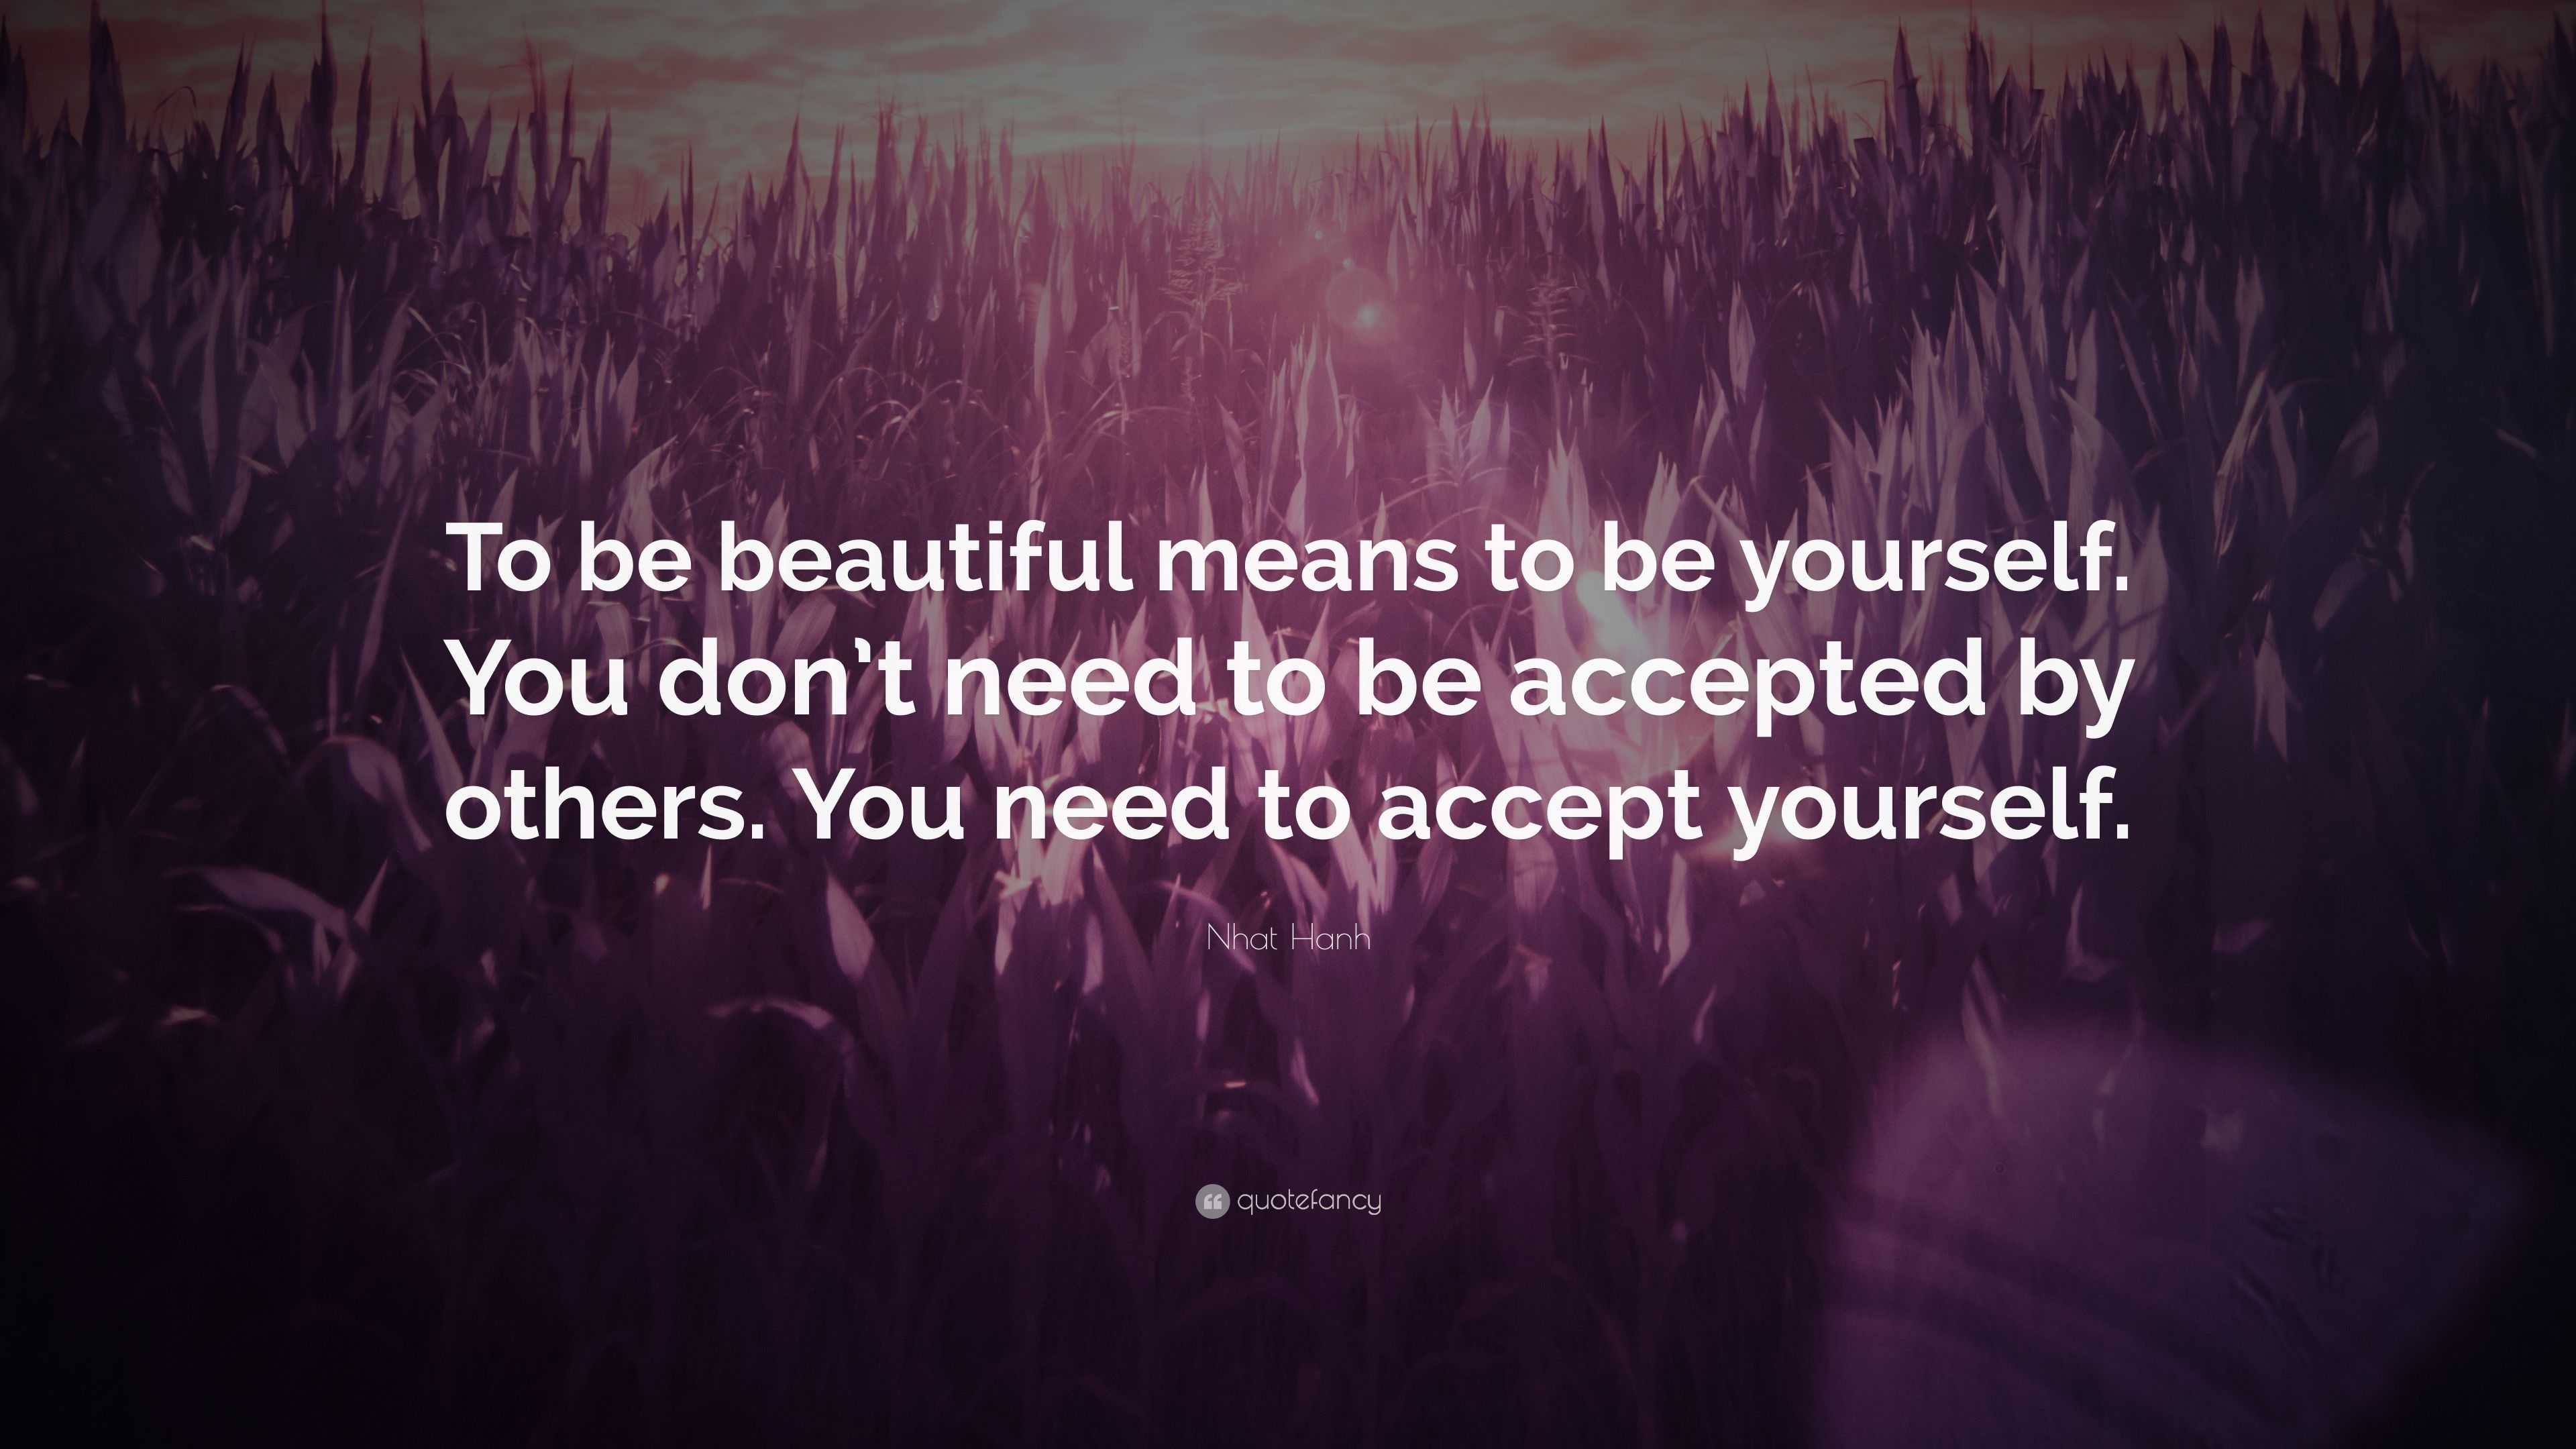 Nhat Hanh Quote: “To be beautiful means to be yourself. You don’t need ...